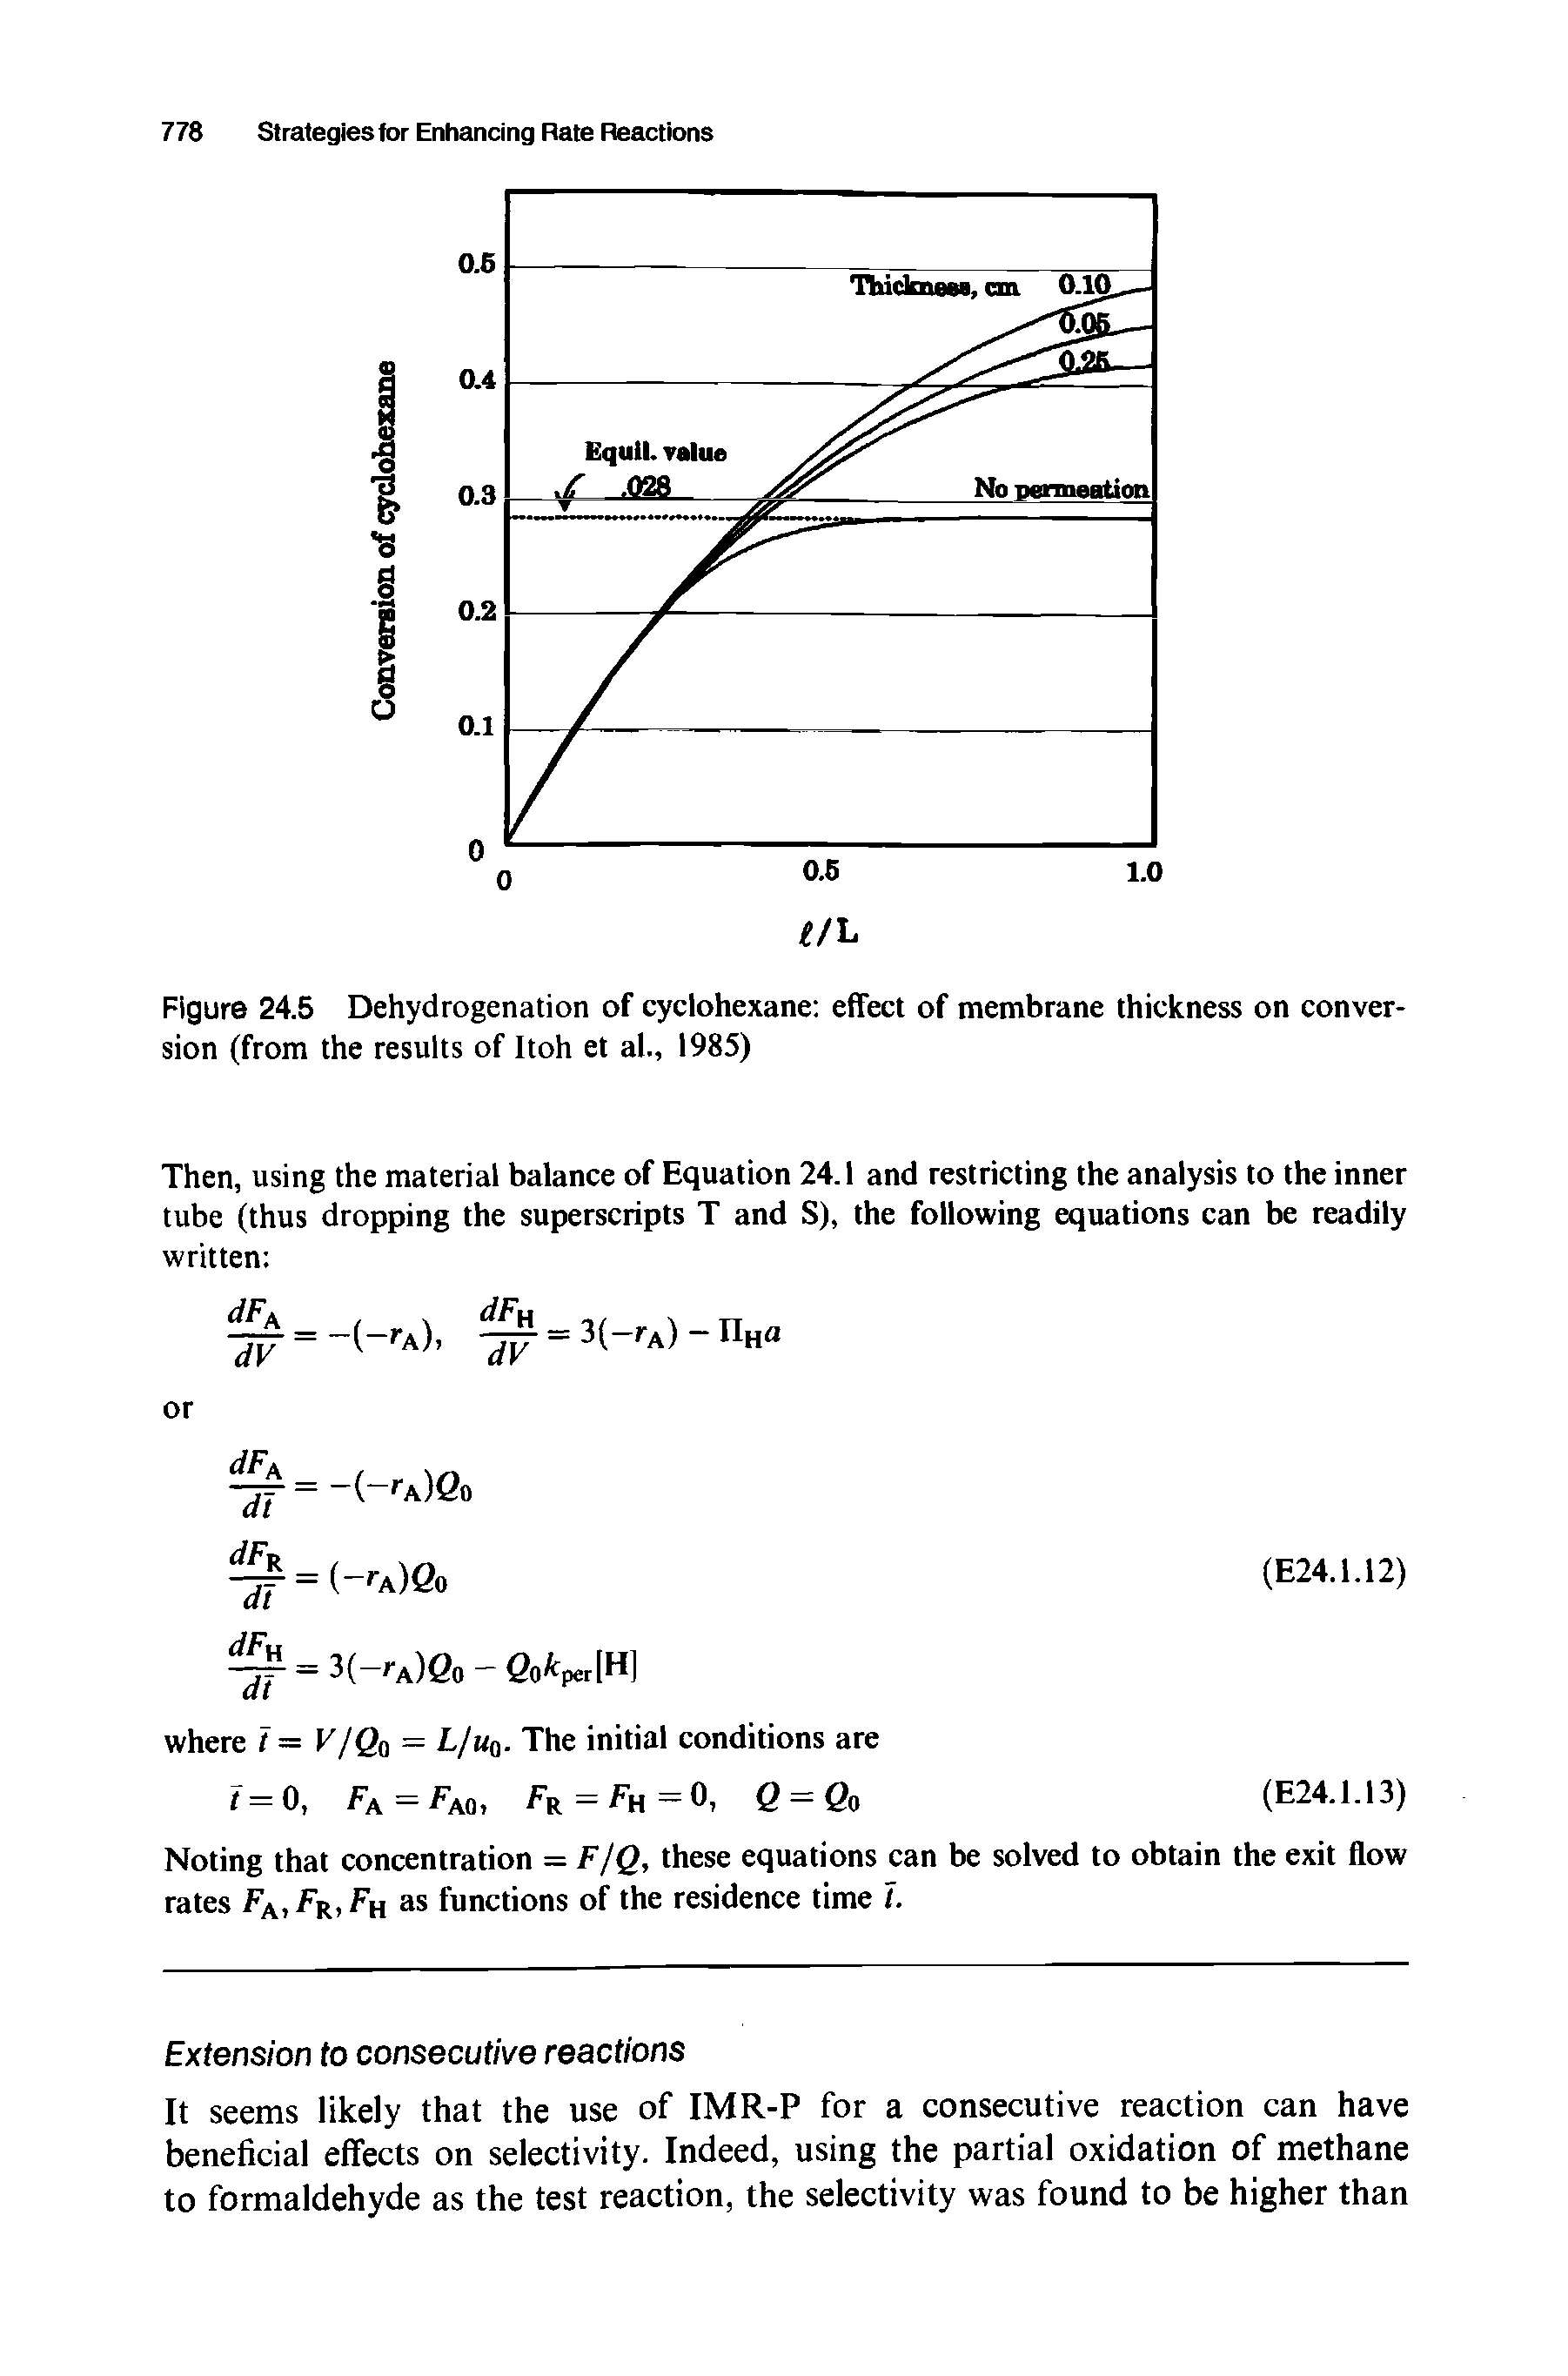 Figure 24.5 Dehydrogenation of cyclohexane effect of membrane thickness on conversion (from the results of Itoh et al., 1985)...